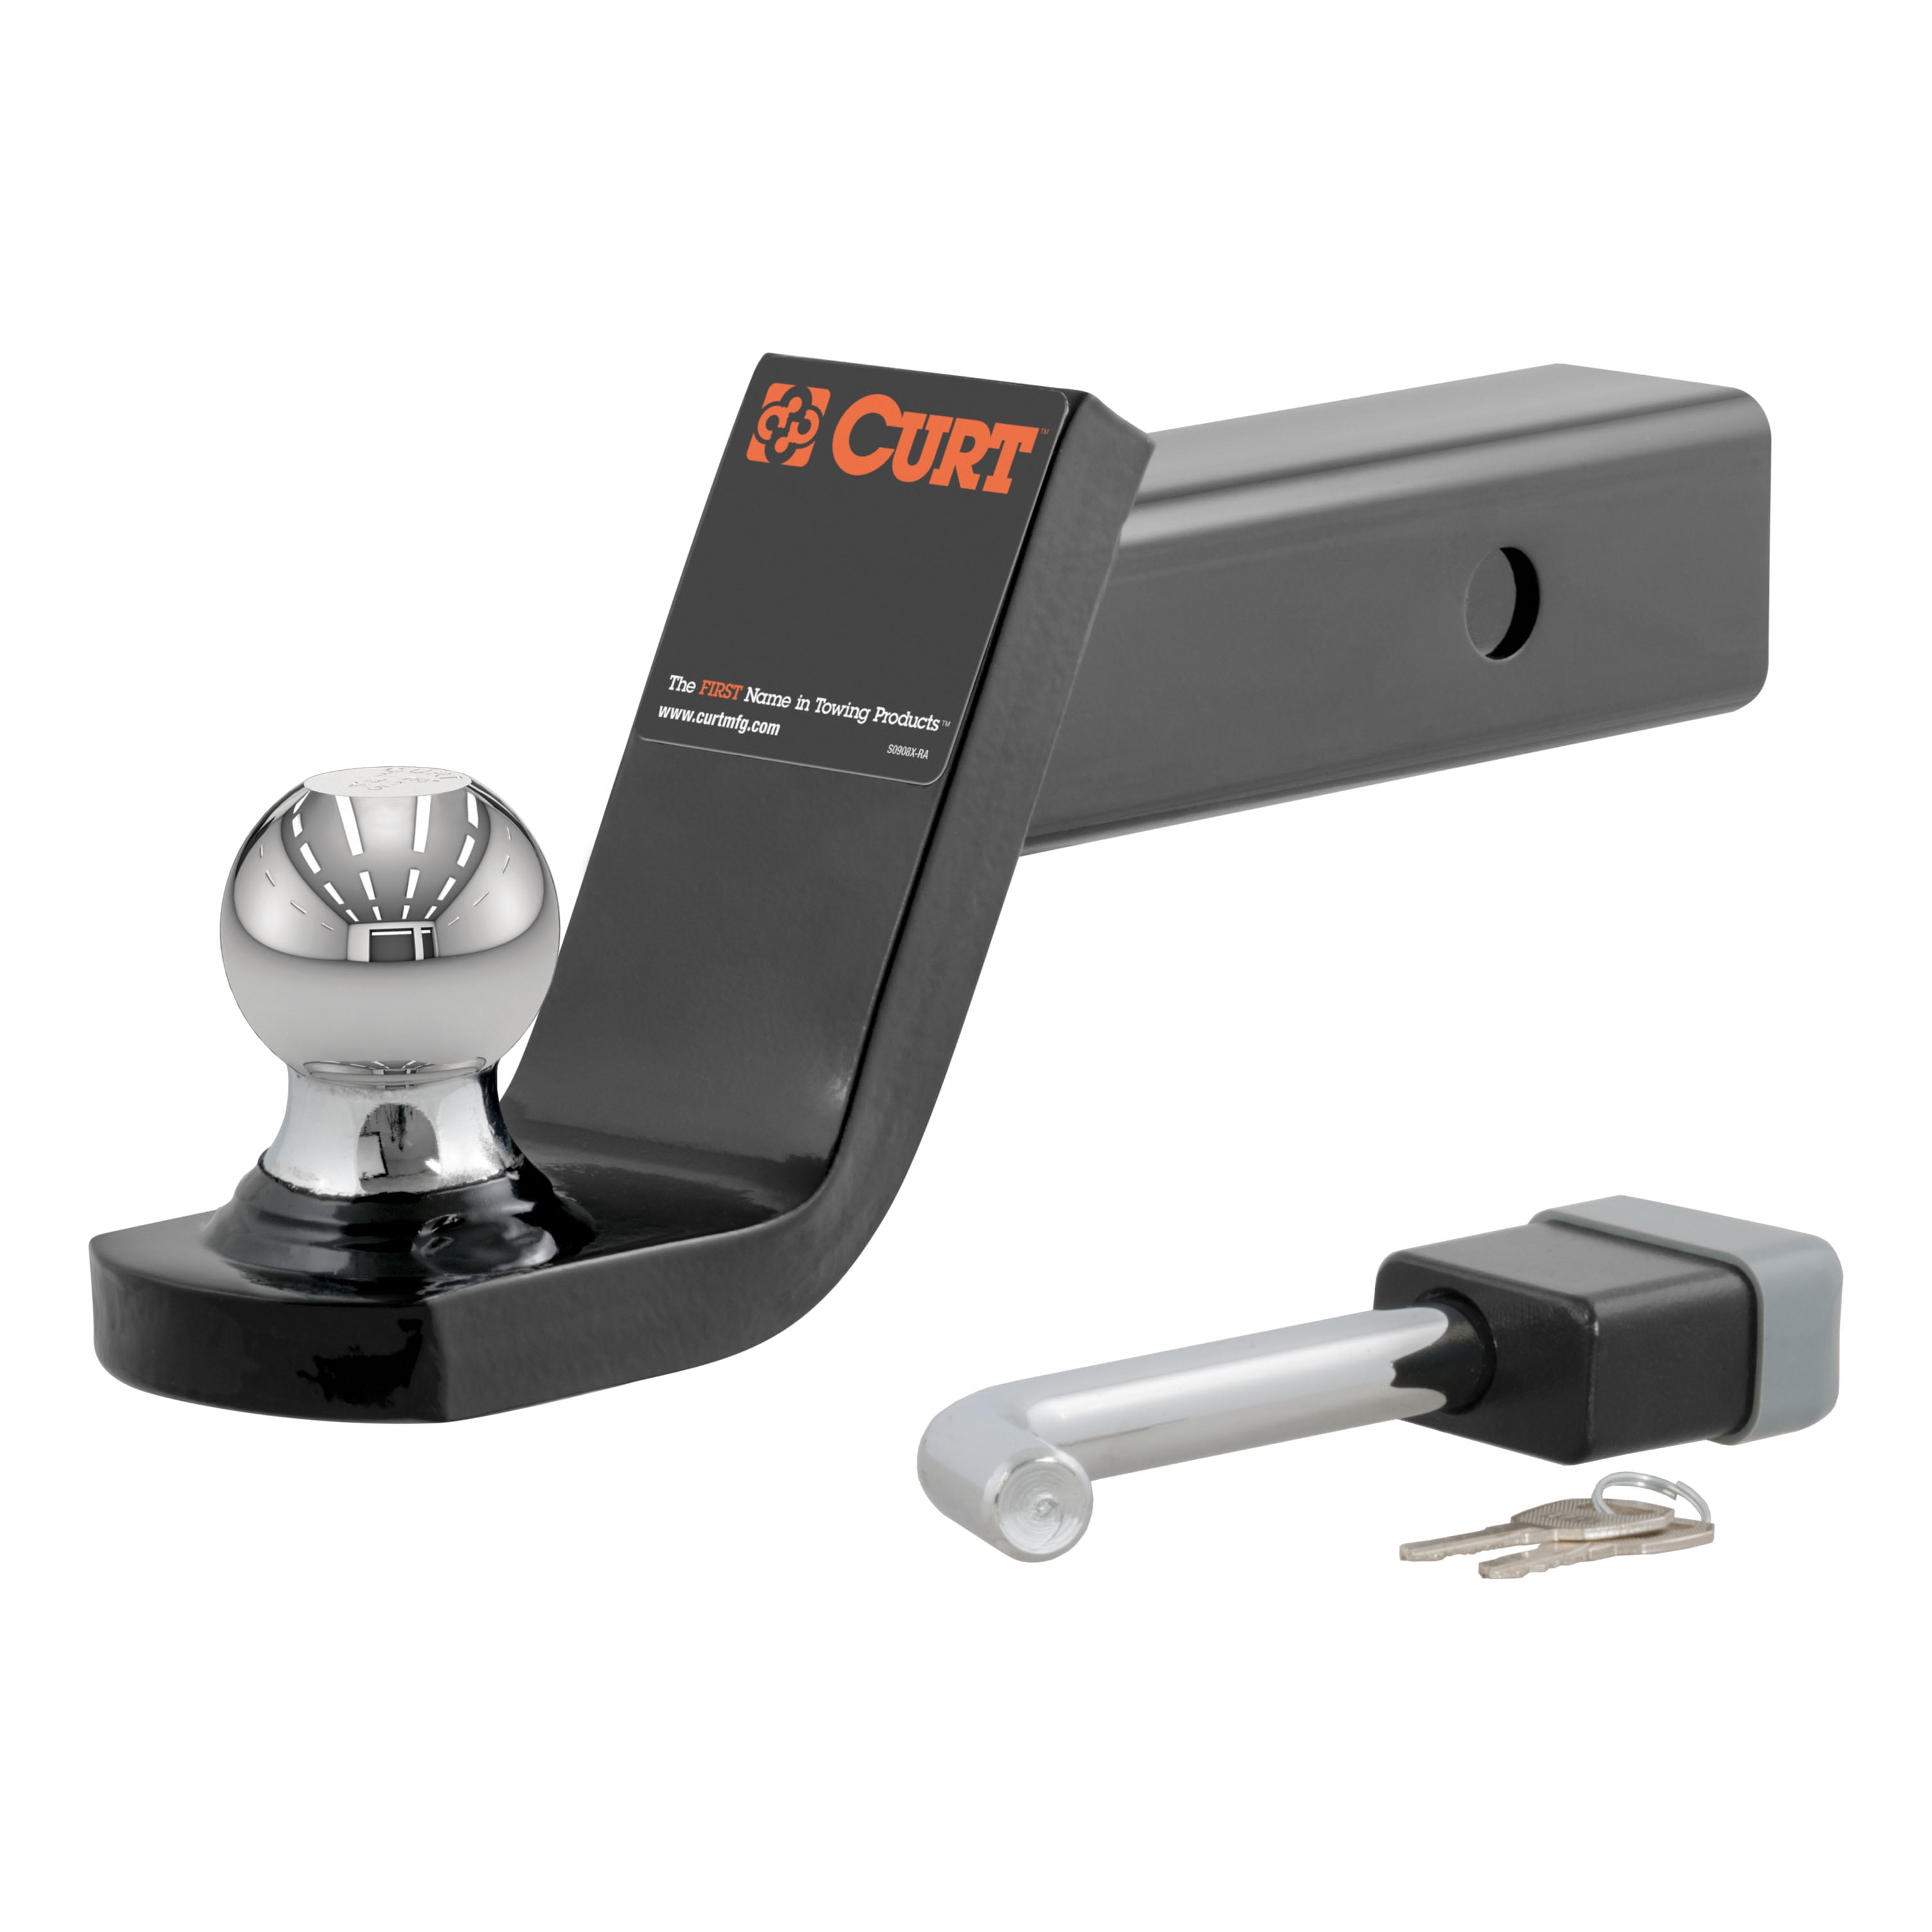 CURT 45142 Trailer Hitch Mount, 2-Inch Ball, Lock, Fits 2-In Receiver, 7,500 lbs, 4" Drop